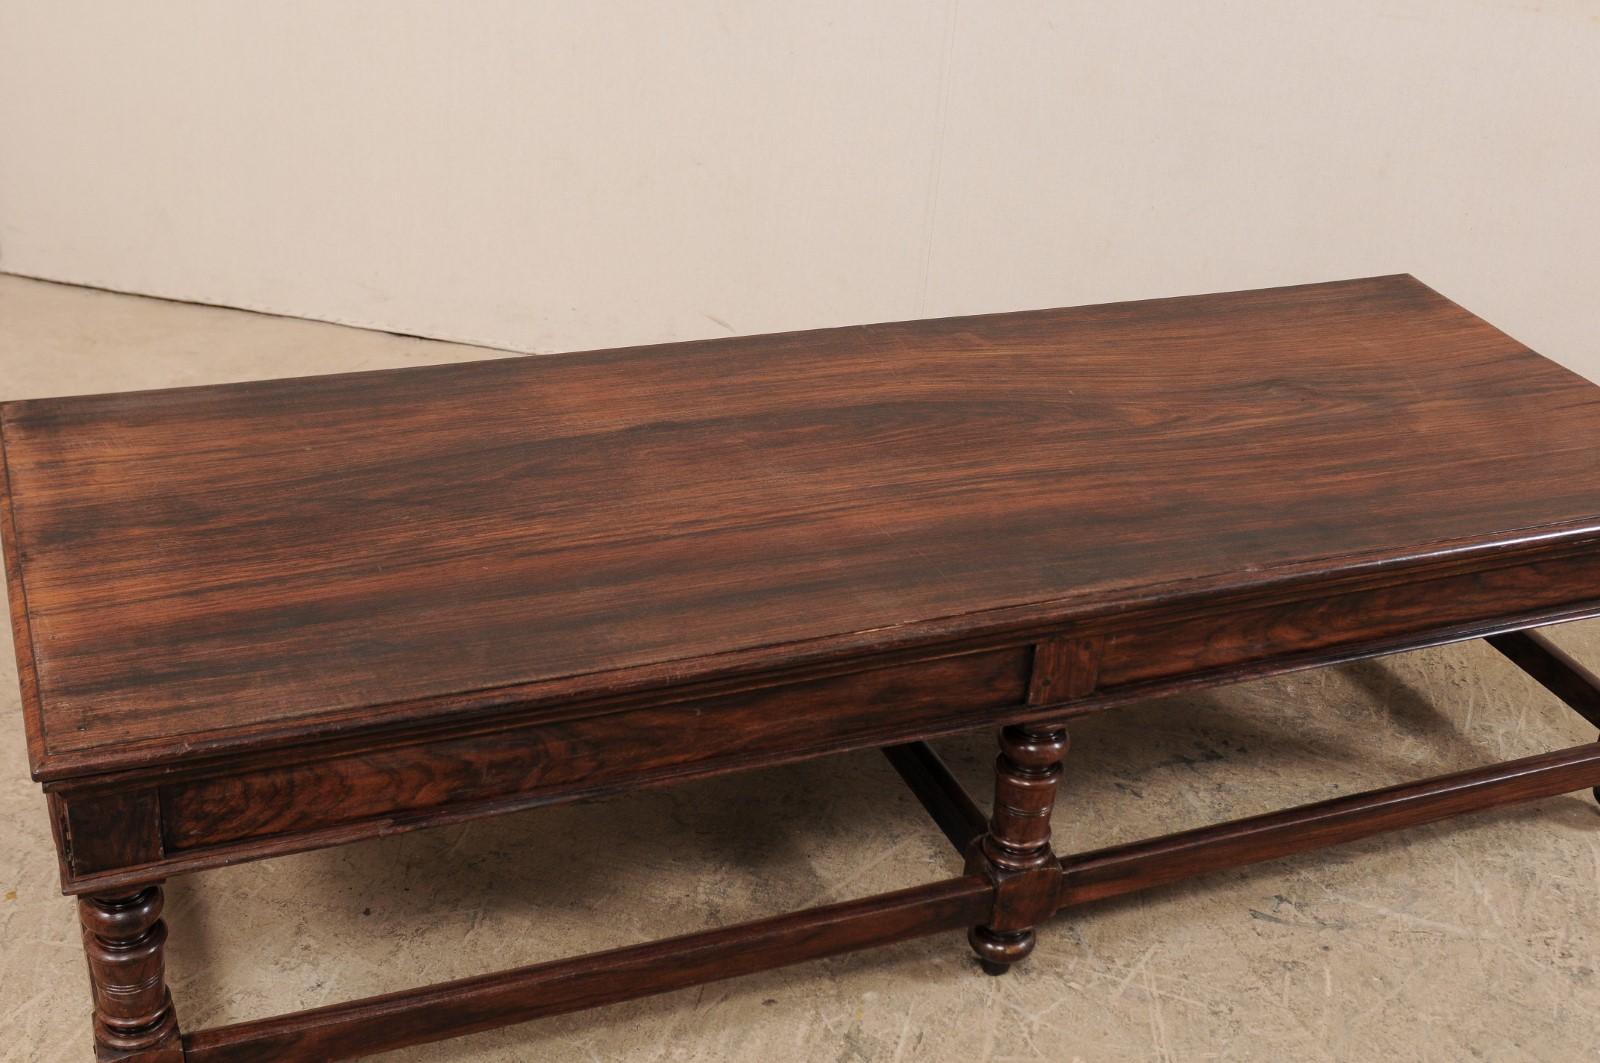 Indian A Beautiful Pair of 6 Ft. Rosewood Coffee Tables (or Benches) from Kerala, India